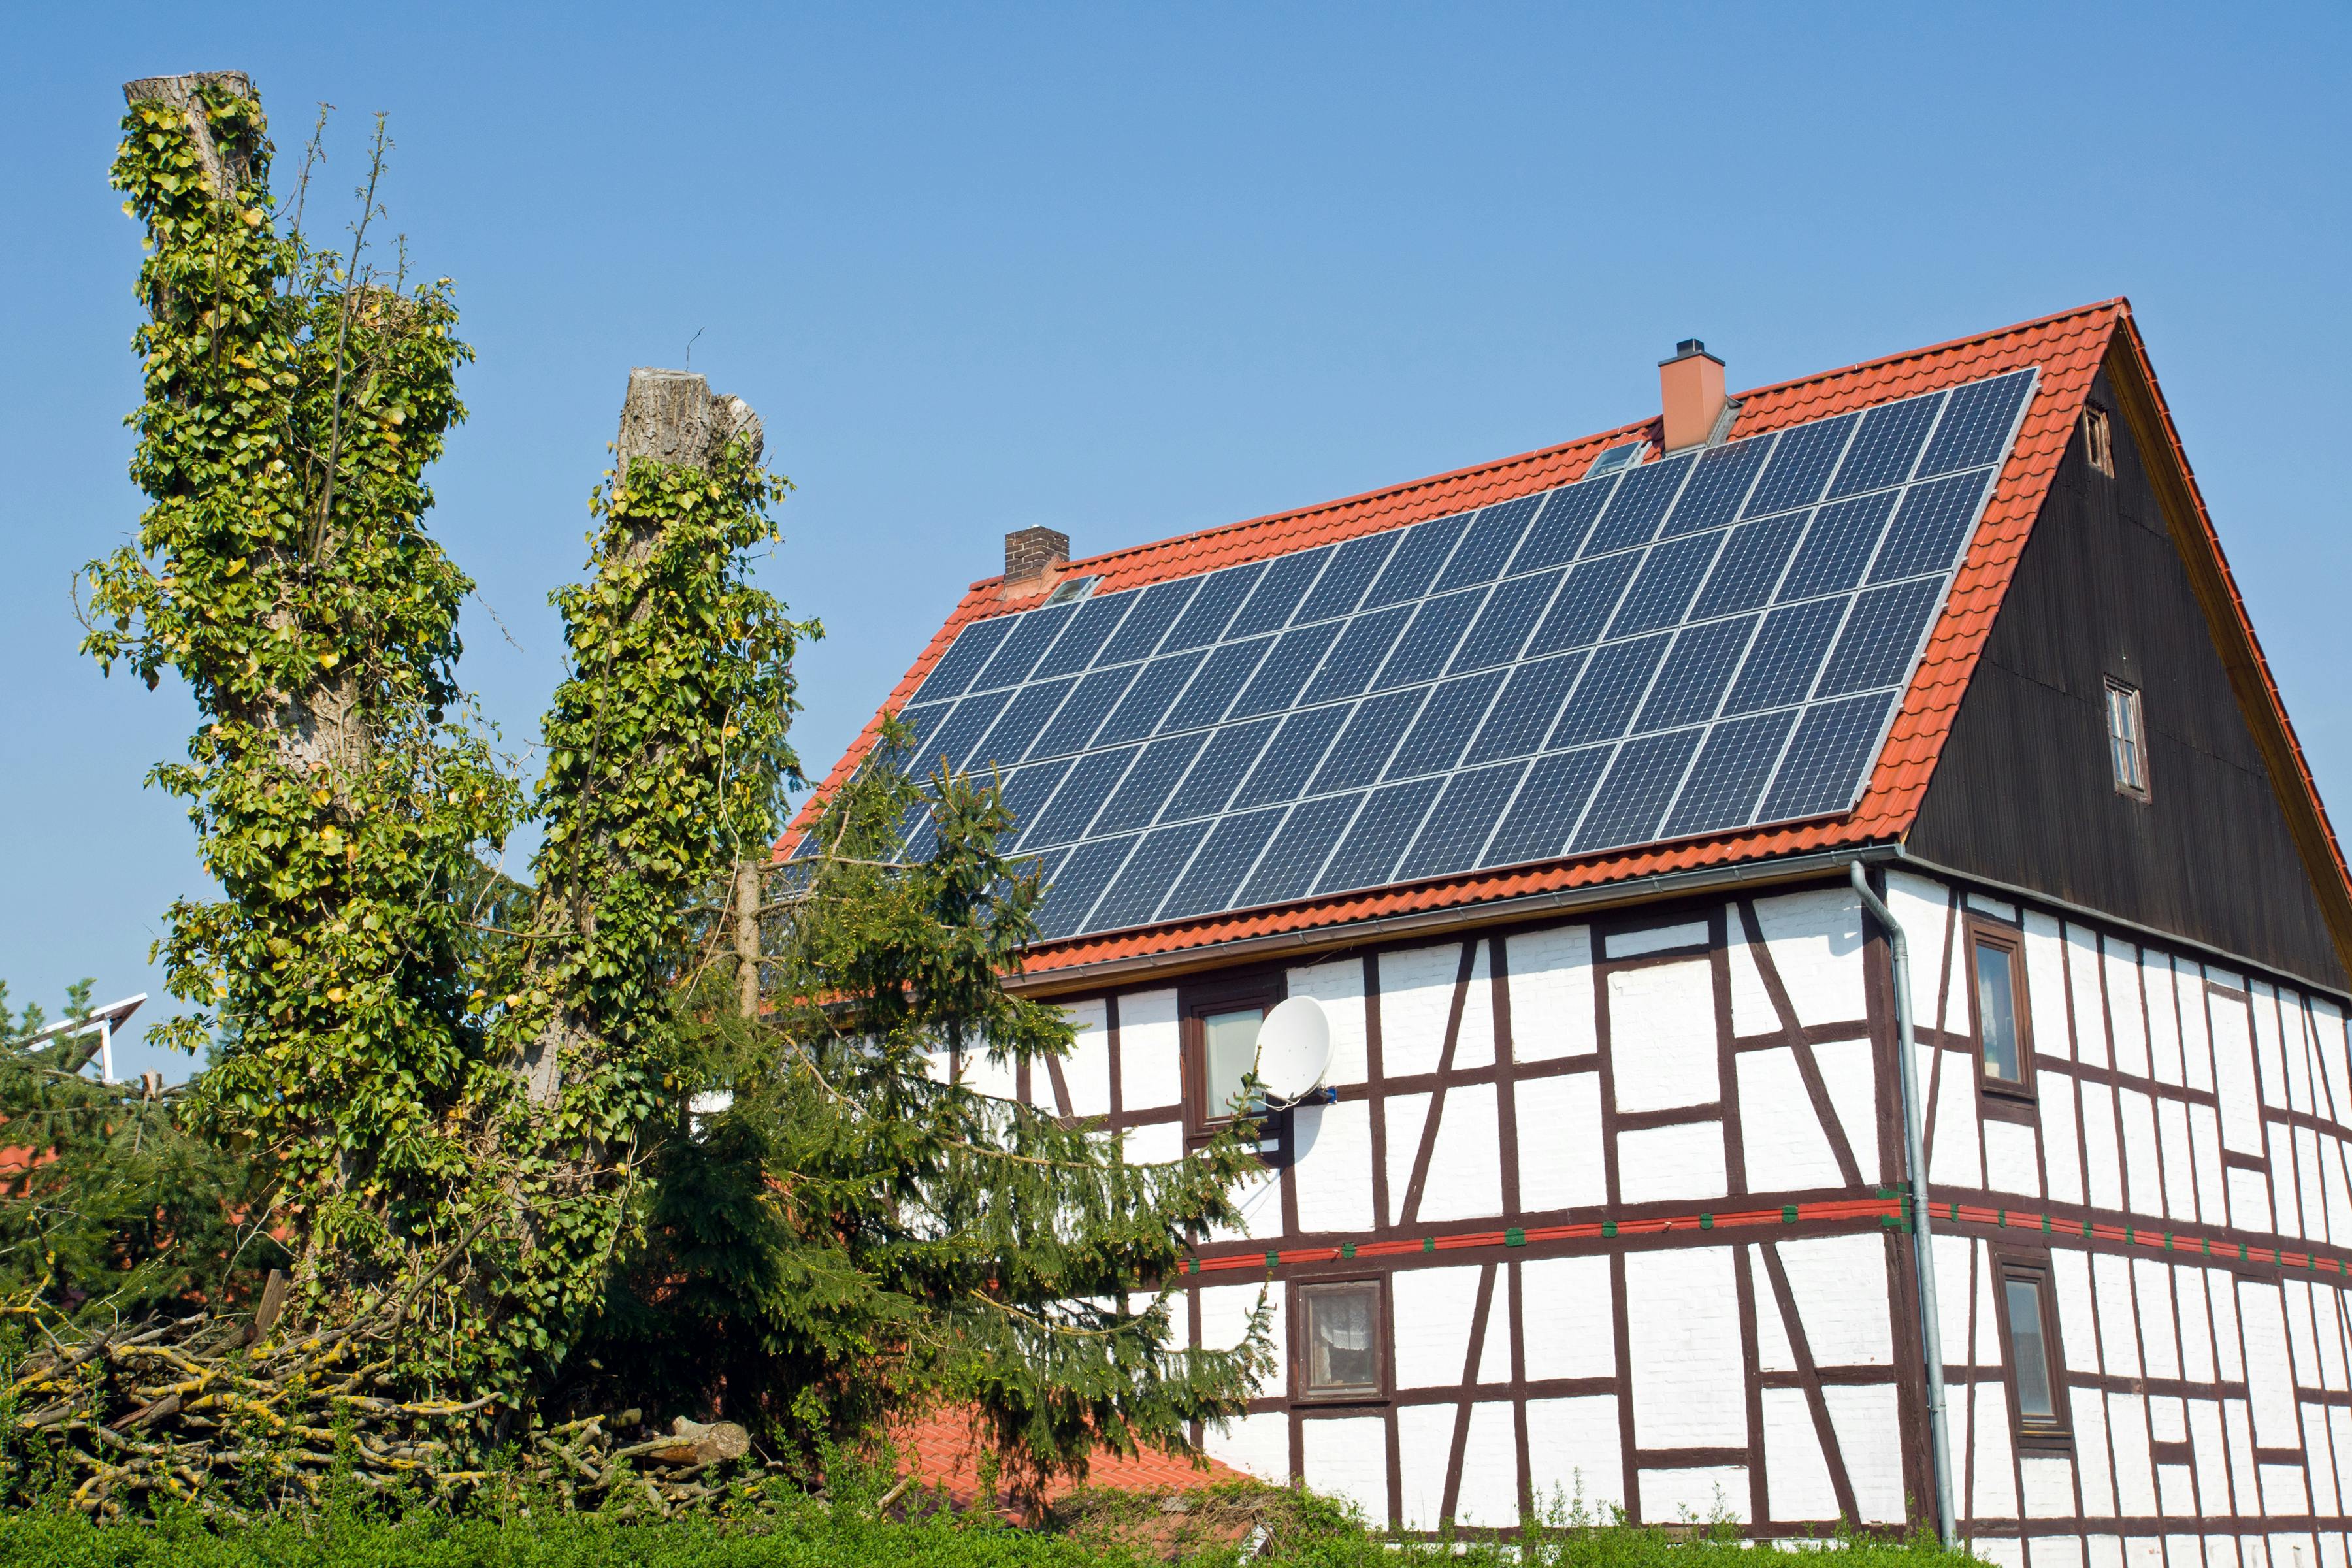 Old house with solar panels